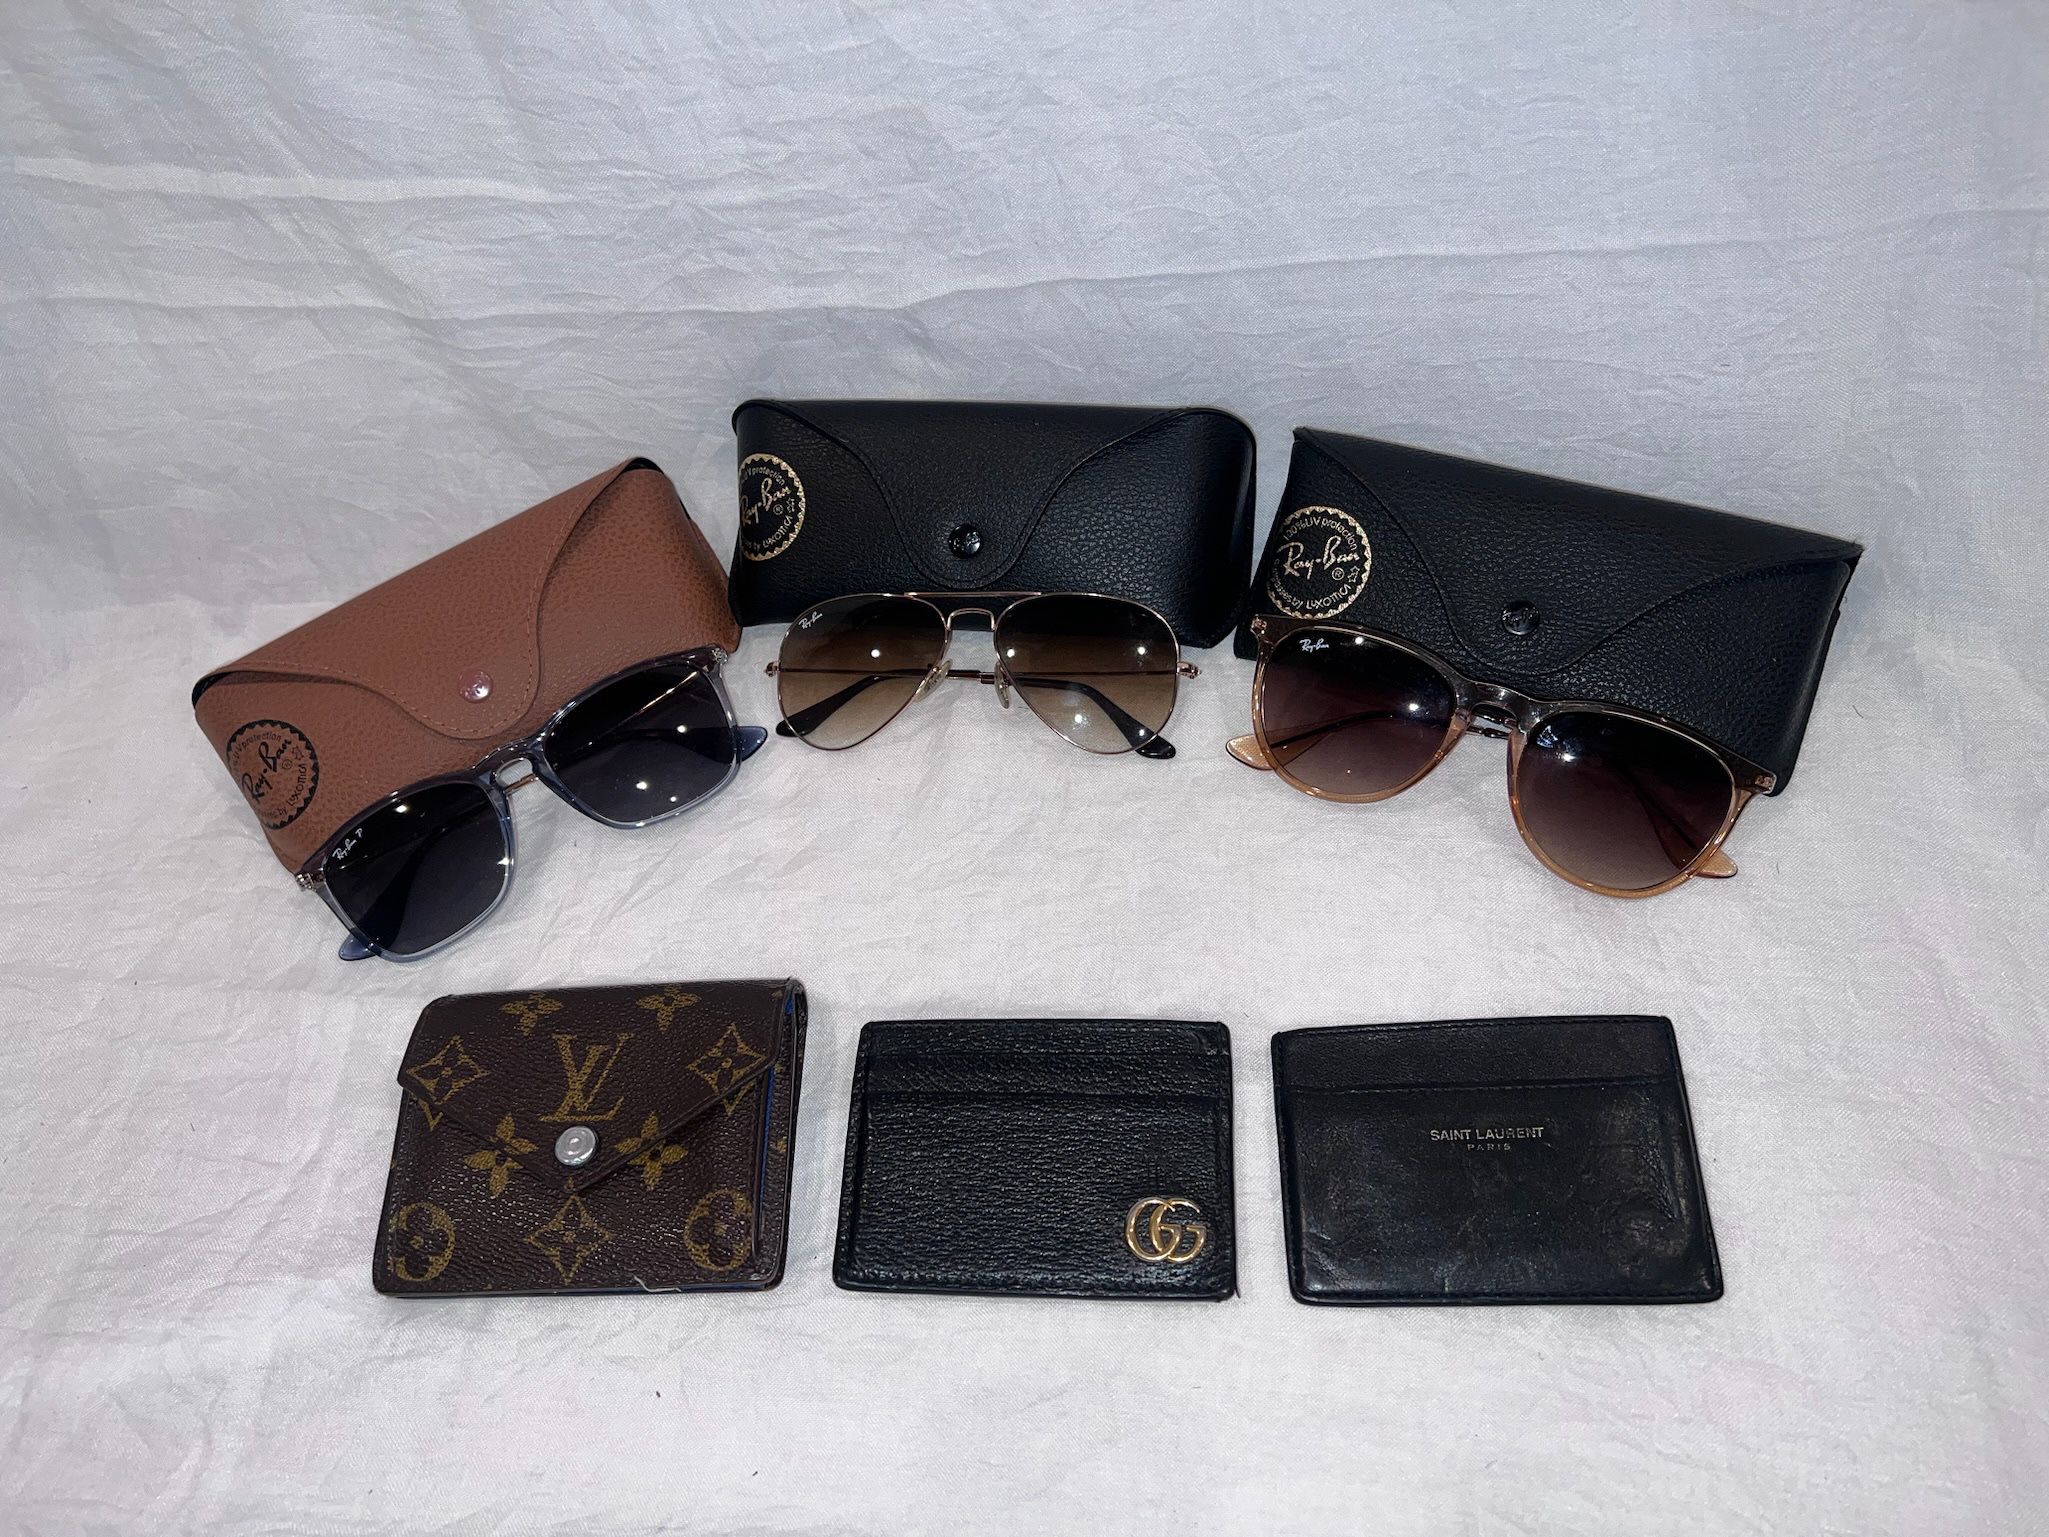 Raybans Louie Wallet, Gucci Wallet, And saint laurent Wallet